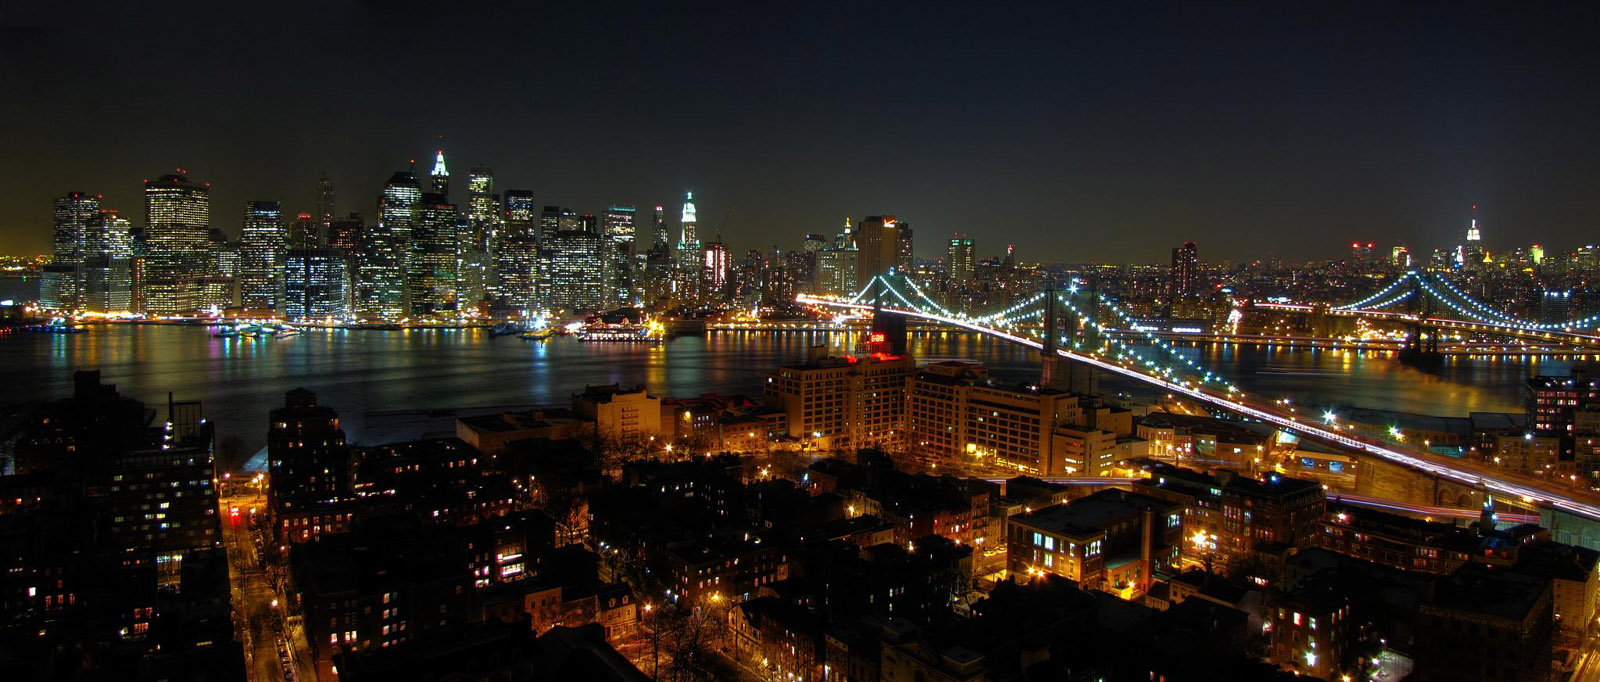 New York City HD Wallpaper Photos In For